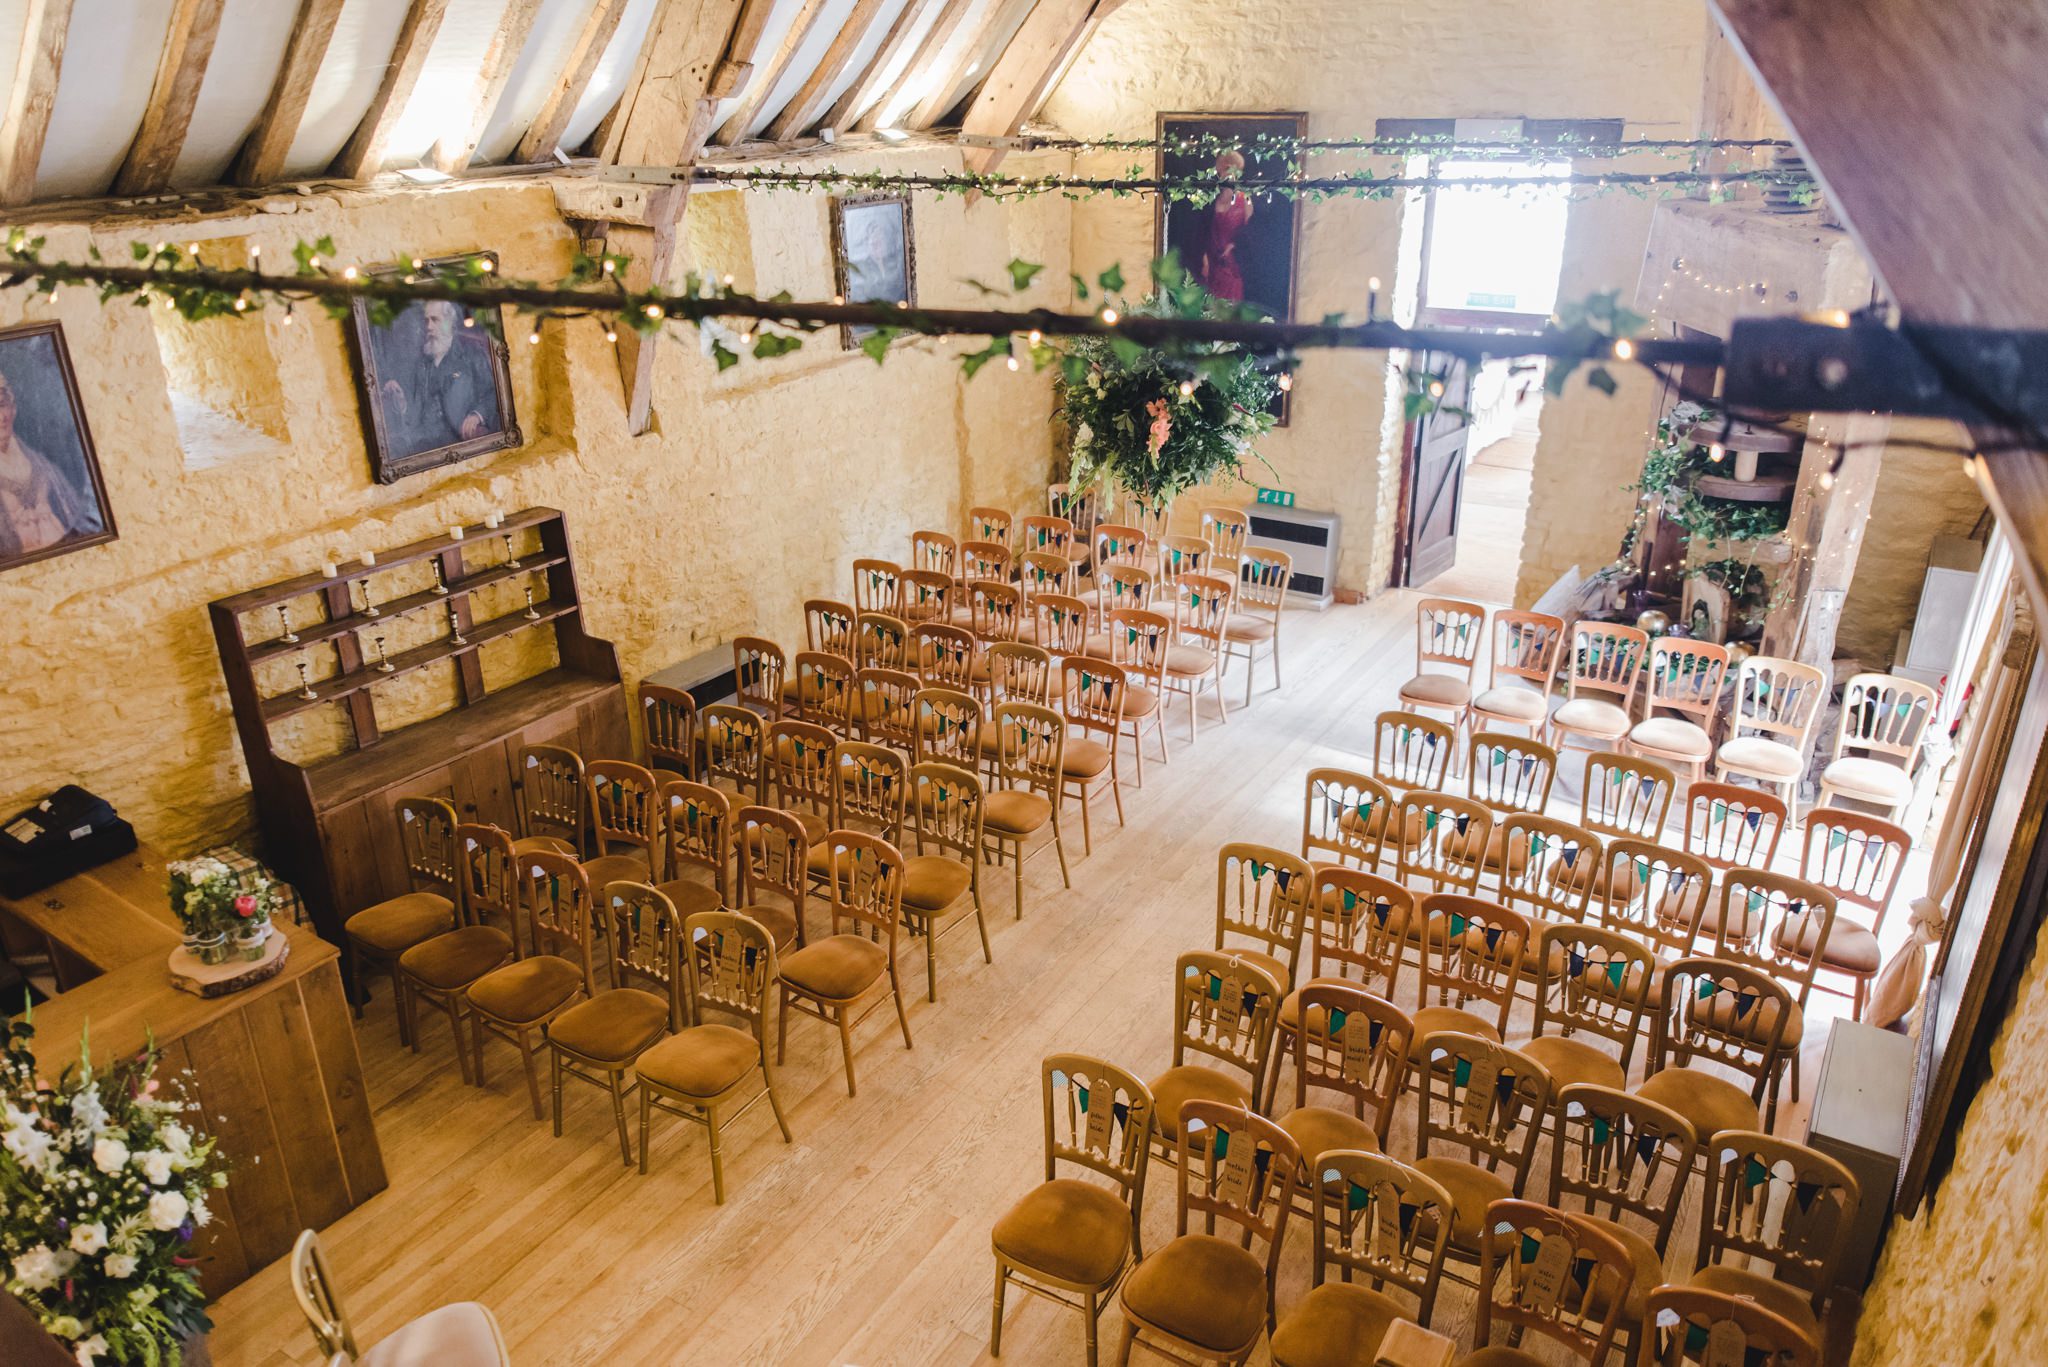 The Cyder Barn at Owlpen Manor set up for a wedding